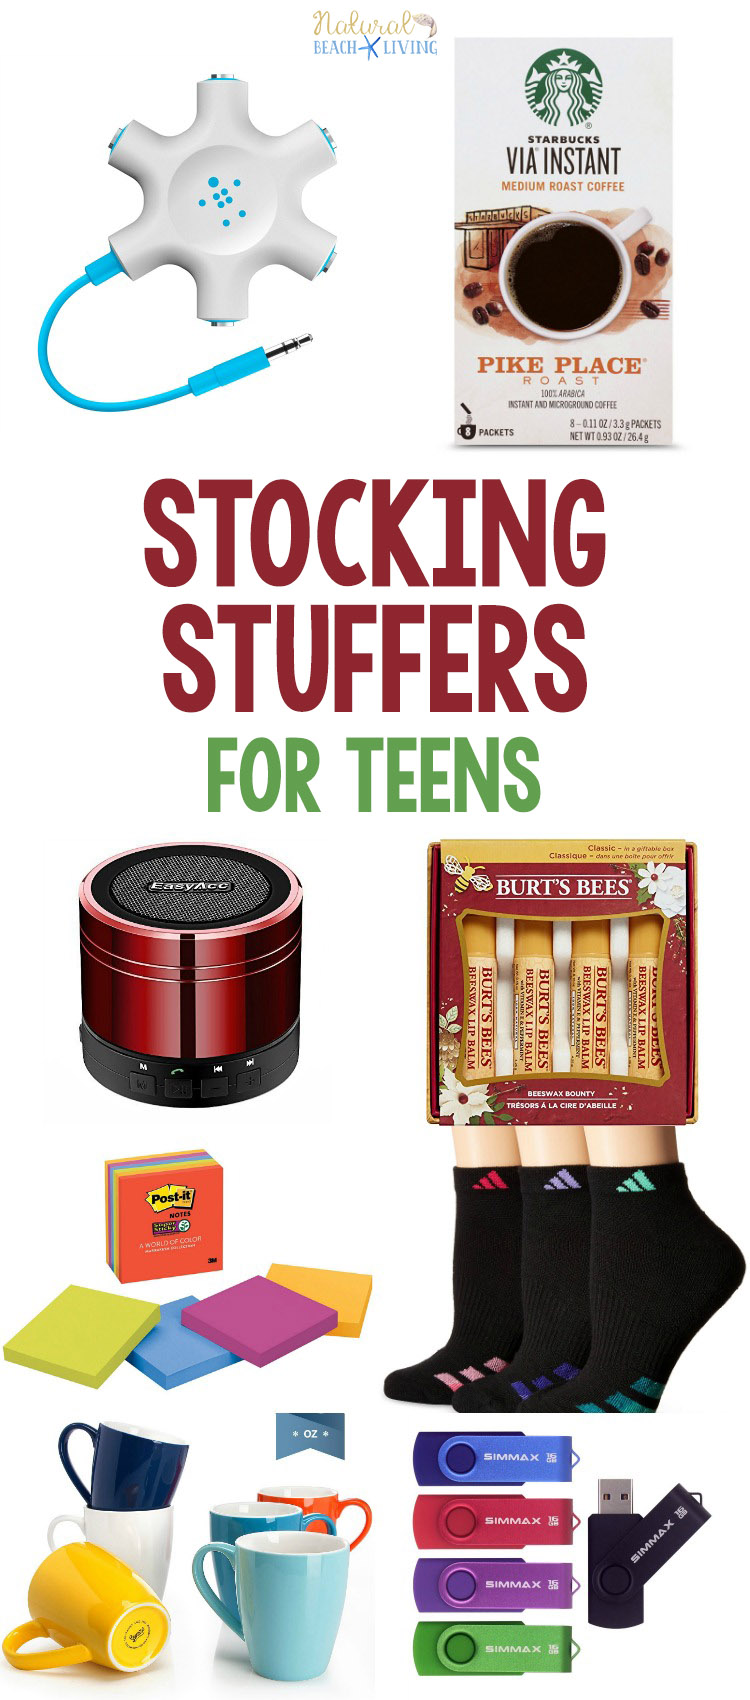 24 Epic Stocking Stuffers for Teens (Boys and Girls) - Natural Beach Living